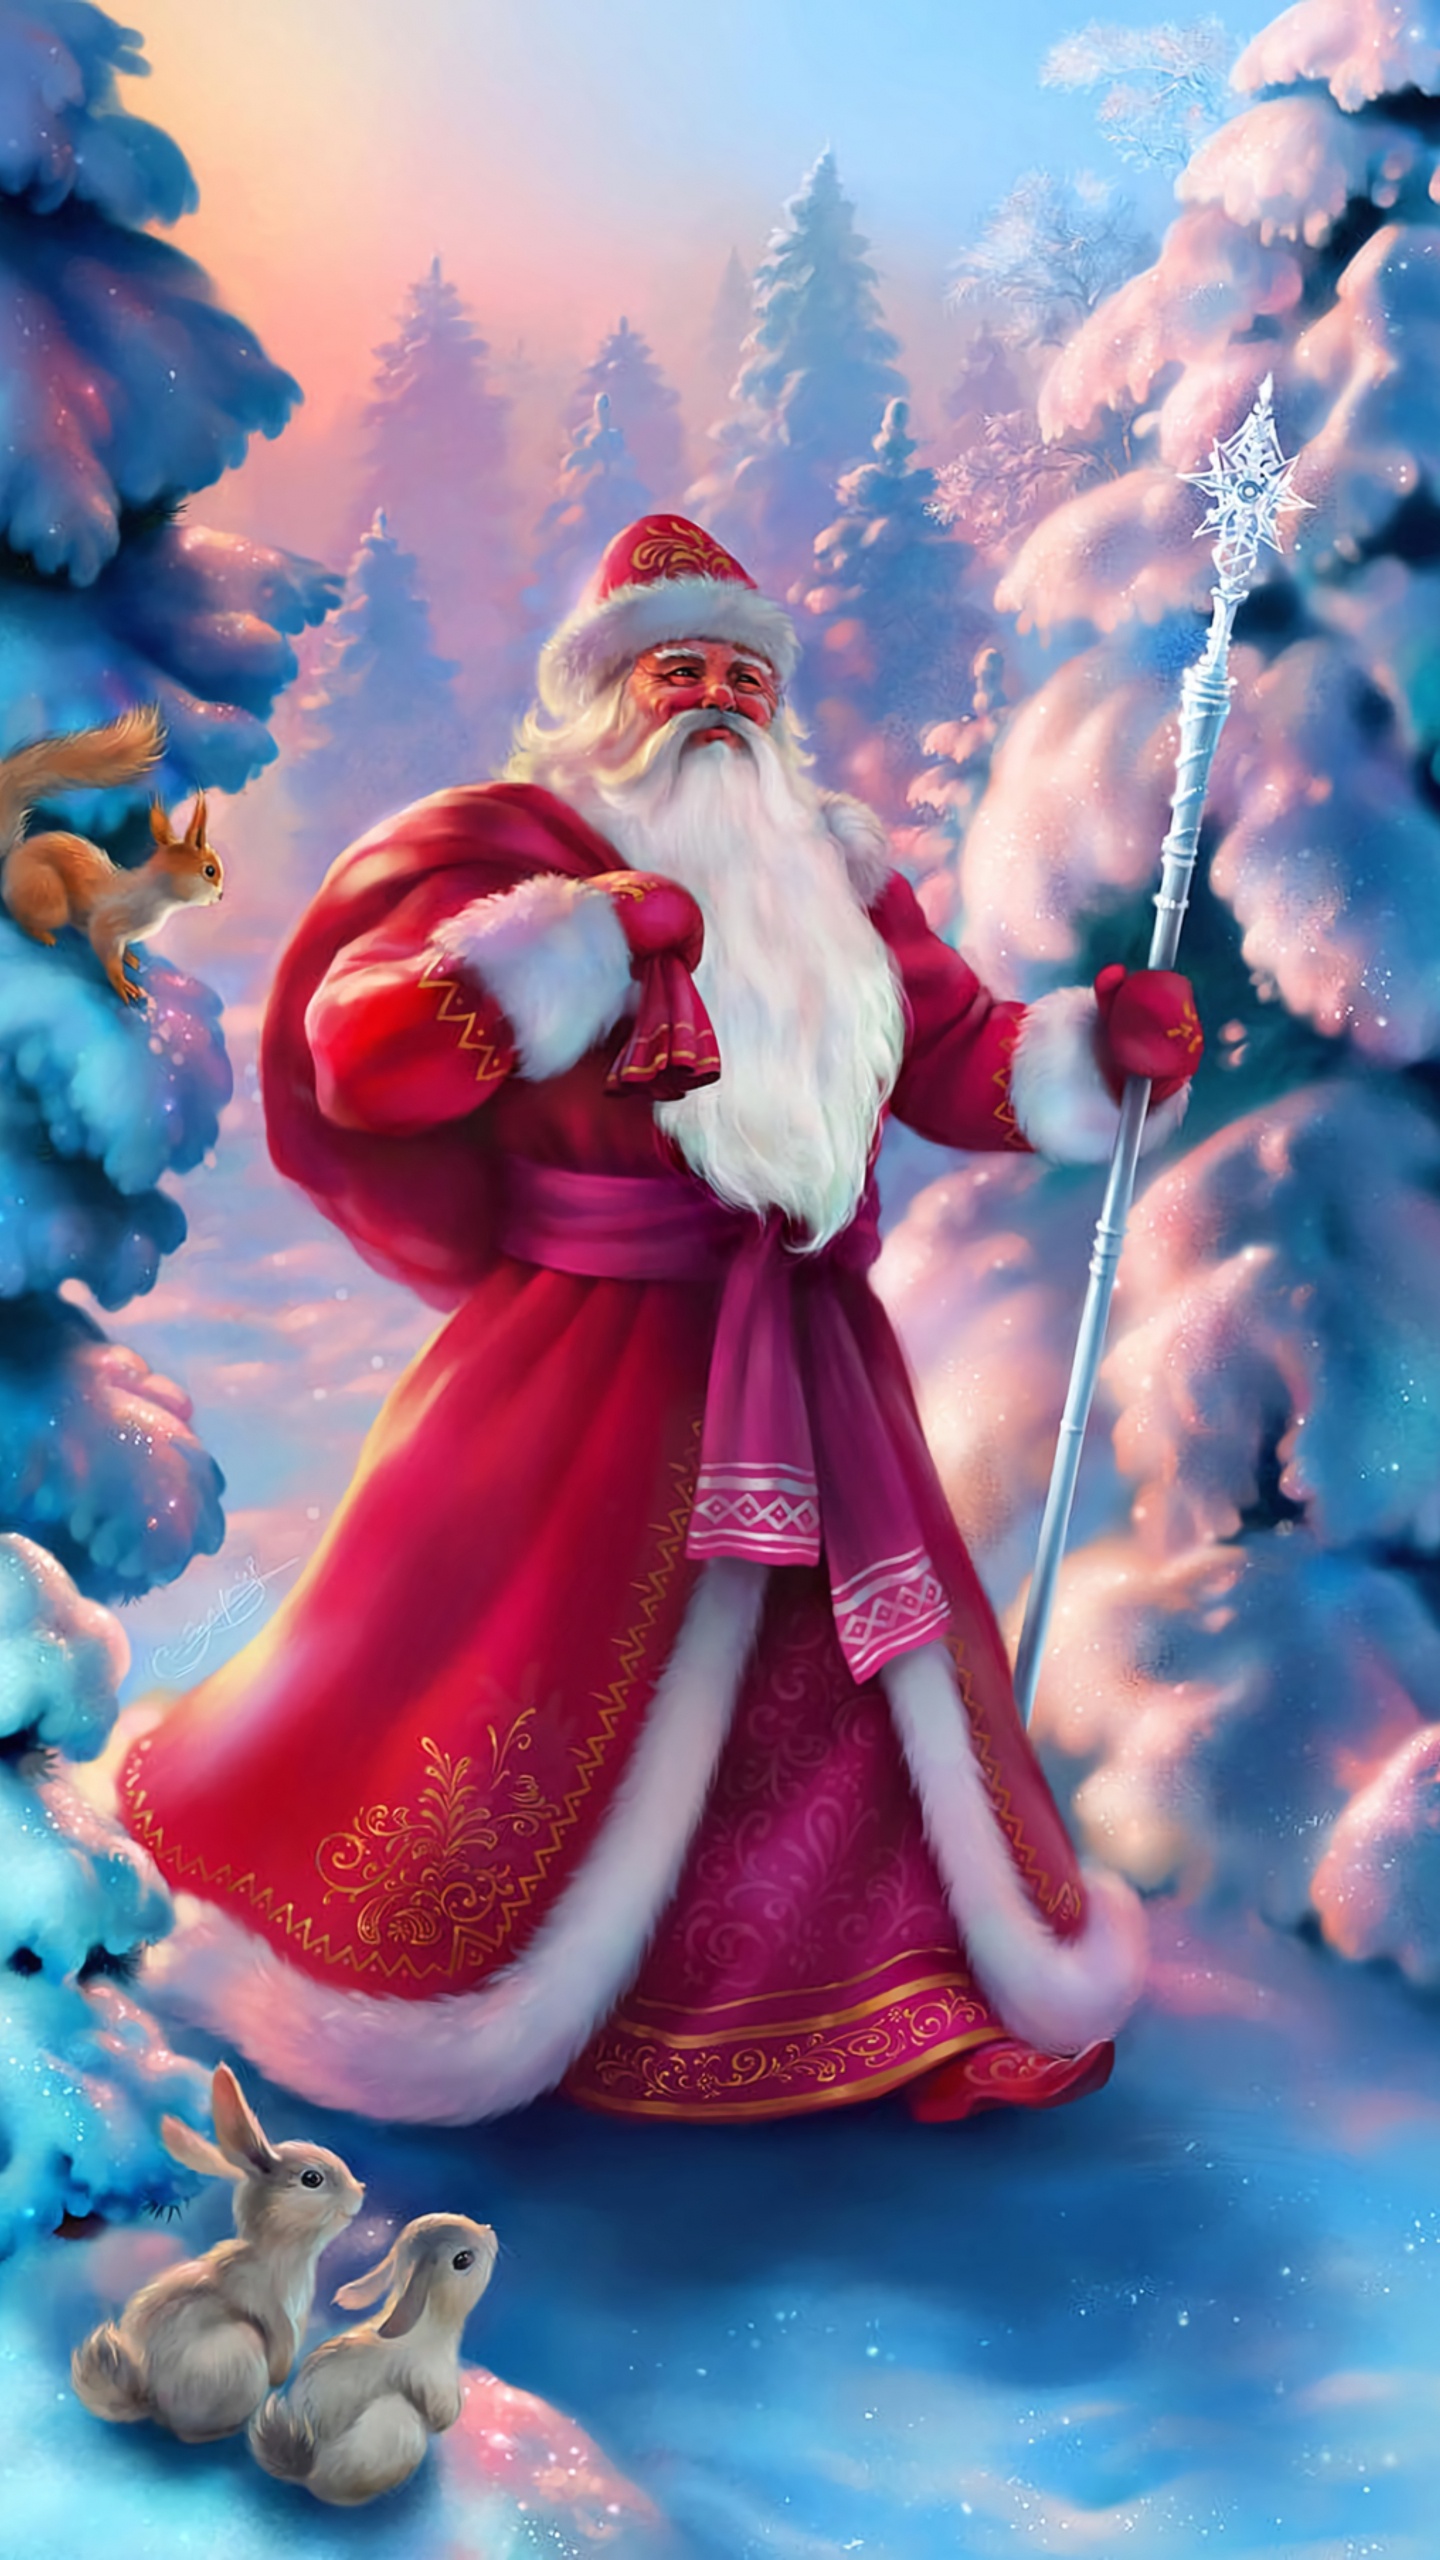 Santa Claus, Ded Moroz, Christmas Day, Christmas, Animation. Wallpaper in 1440x2560 Resolution